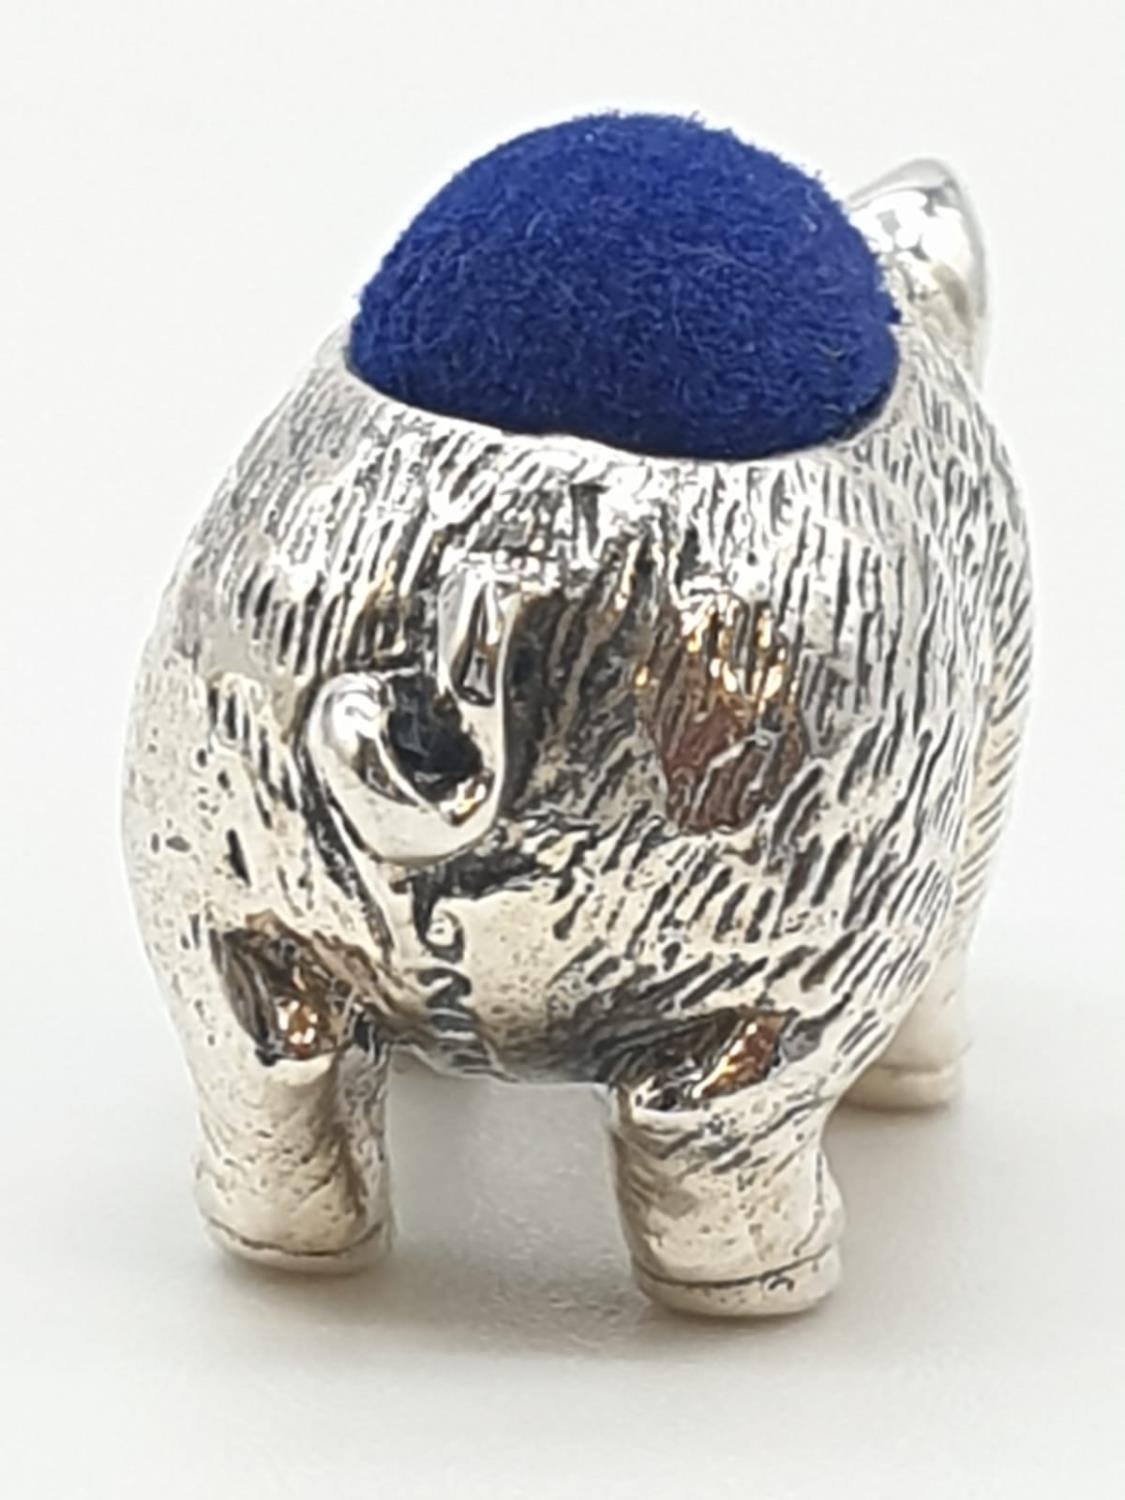 Silver pin cushion in the form of a pig or boar, 2.7cm approx - Image 3 of 5